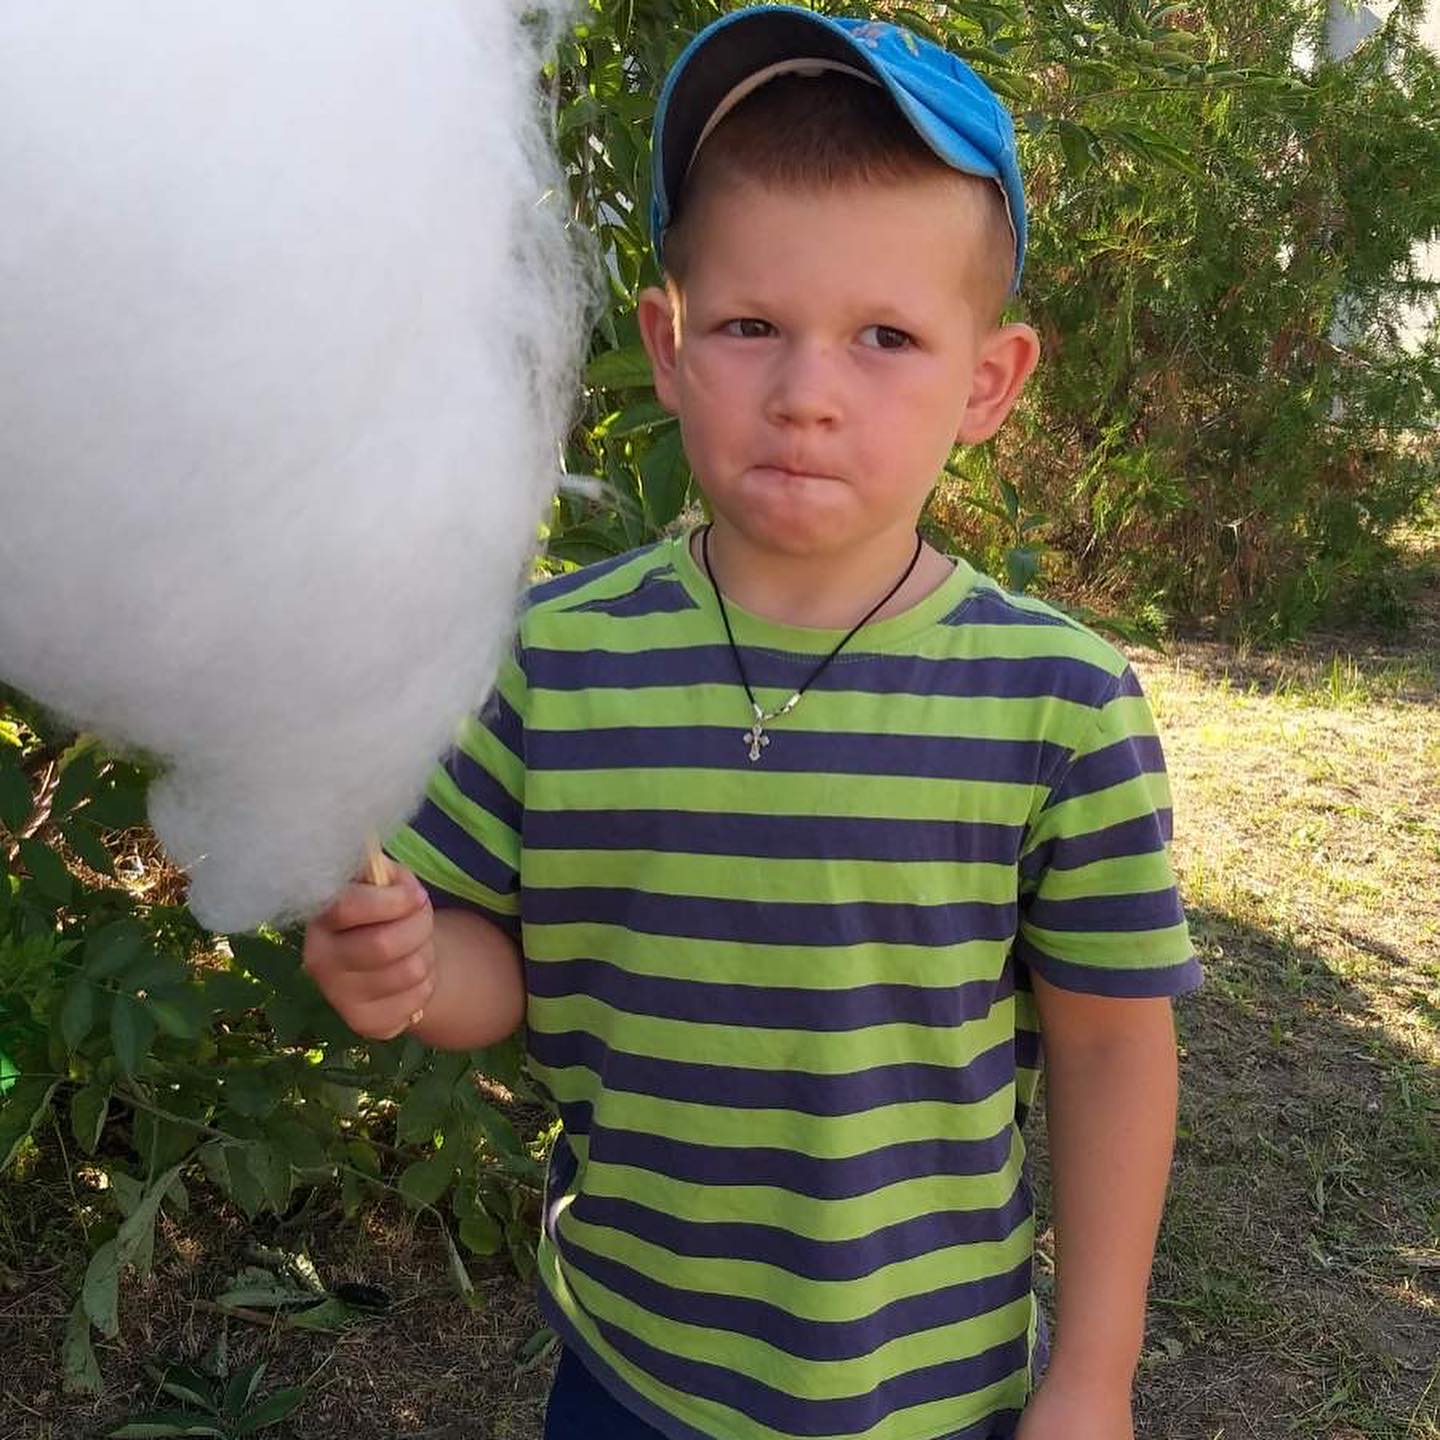 A young boy holding a cotton candy.